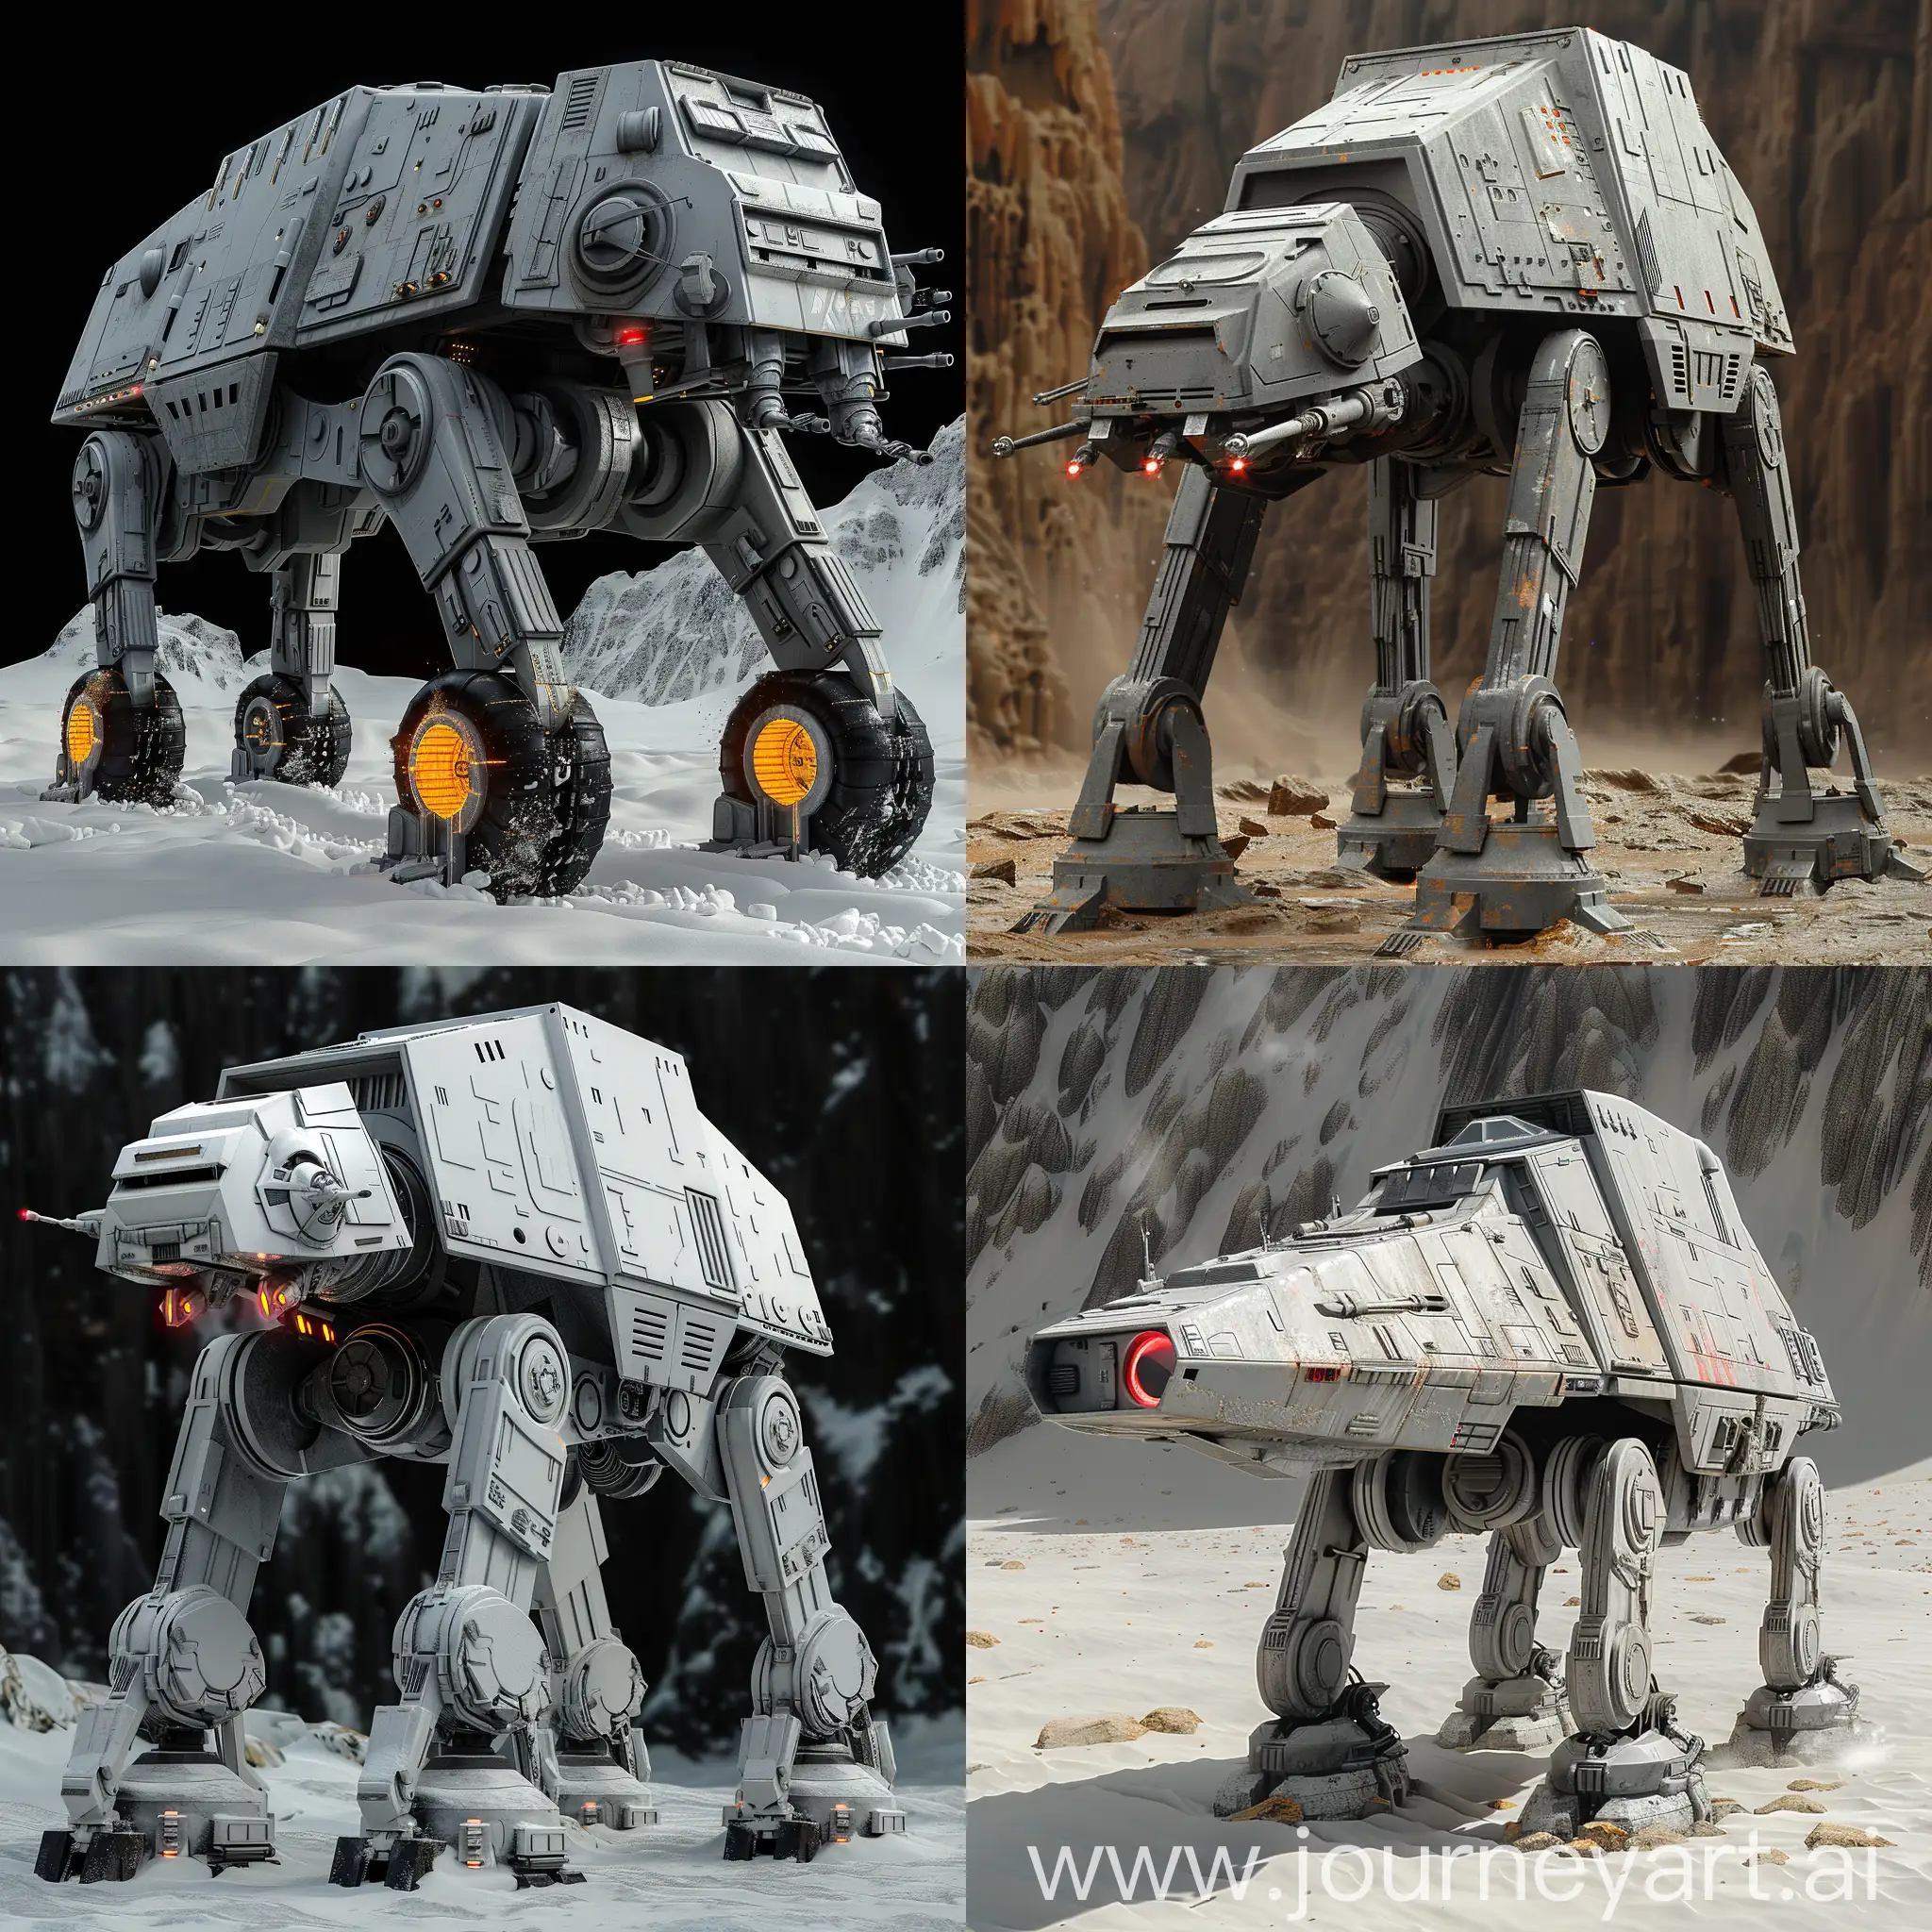 Futuristic Star Wars All Terrain Armored Transportation https://static.wikia.nocookie.net/starwars/images/1/16/AT-AT_2_Fathead.png/revision/latest/scale-to-width-down/1200?cb=20161108042721, Advanced AI Integration, Energy Shielding, Hyperdrive Capability, Stealth Mode, Adaptive Camouflage, Energy Weapons, Drone Deployment, Sensor Suite, Nanotechnology Repair System, Holographic Command Interface, Self-Healing Armor, Nanoscale Sensors, Nanoscale Weaponry, Nanoscale Communication Systems, Nanoscale Energy Storage, Nanoscale Cloaking Technology, Nanoscale Thermal Management, Nanoscale Mobility Enhancements, Nanoscale Environmental Adaptation, Nanoscale Stealth Coating, Regenerative Tissue Armor, Bio-Enhanced Strength and Durability, Bio-Adaptive Camouflage, Bio-Integrated Weapon Systems, Bio-Regenerative Power Source, Bio-Sensory Systems, Bio-Enhanced Communication Networks, Bio-Adaptive Climate Control, Bio-Enhanced Crew Support Systems, Bio-Integrated Environmental Recycling, octane render --stylize 1000